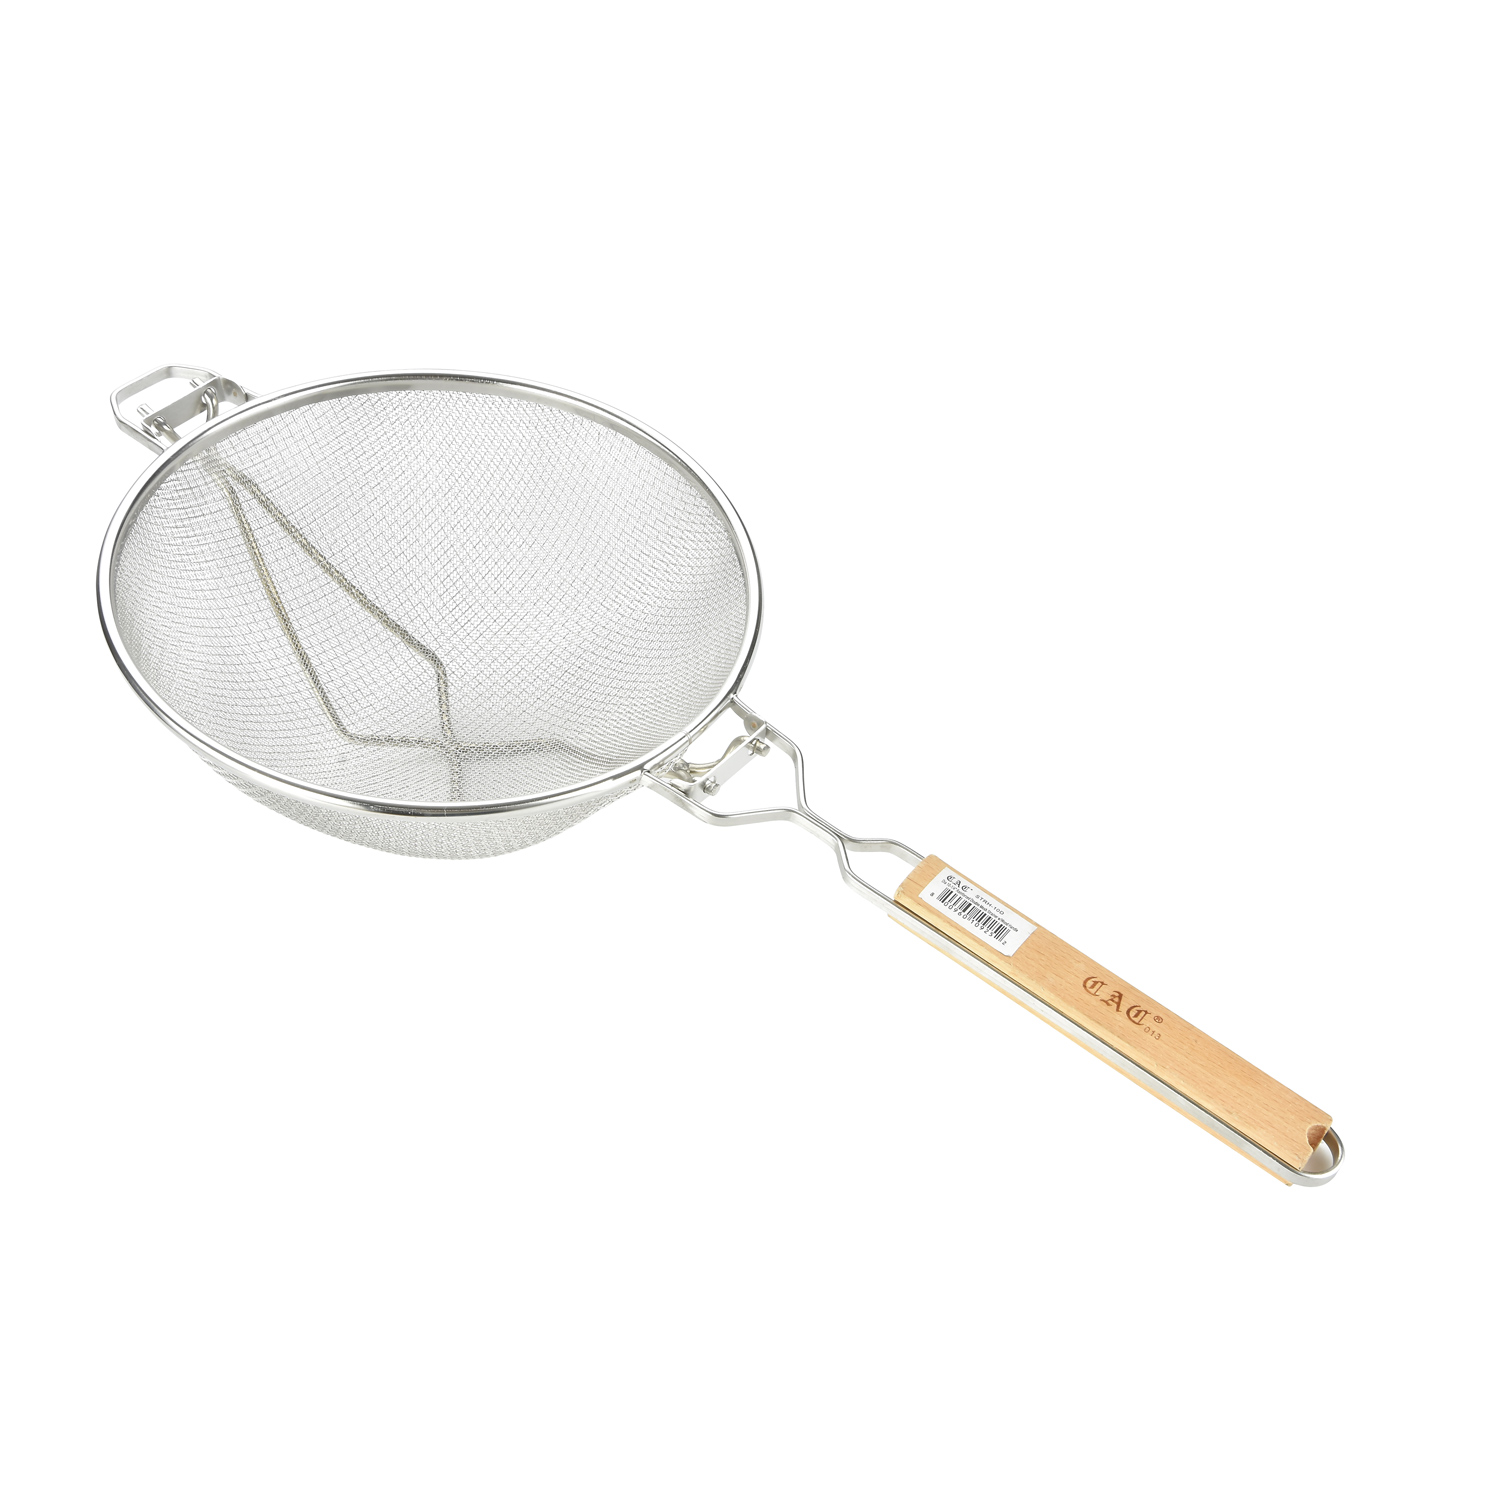 CAC China STRH-10D Double Reinforced Mesh Strainer with Wood Handle 10 1/4" Dia